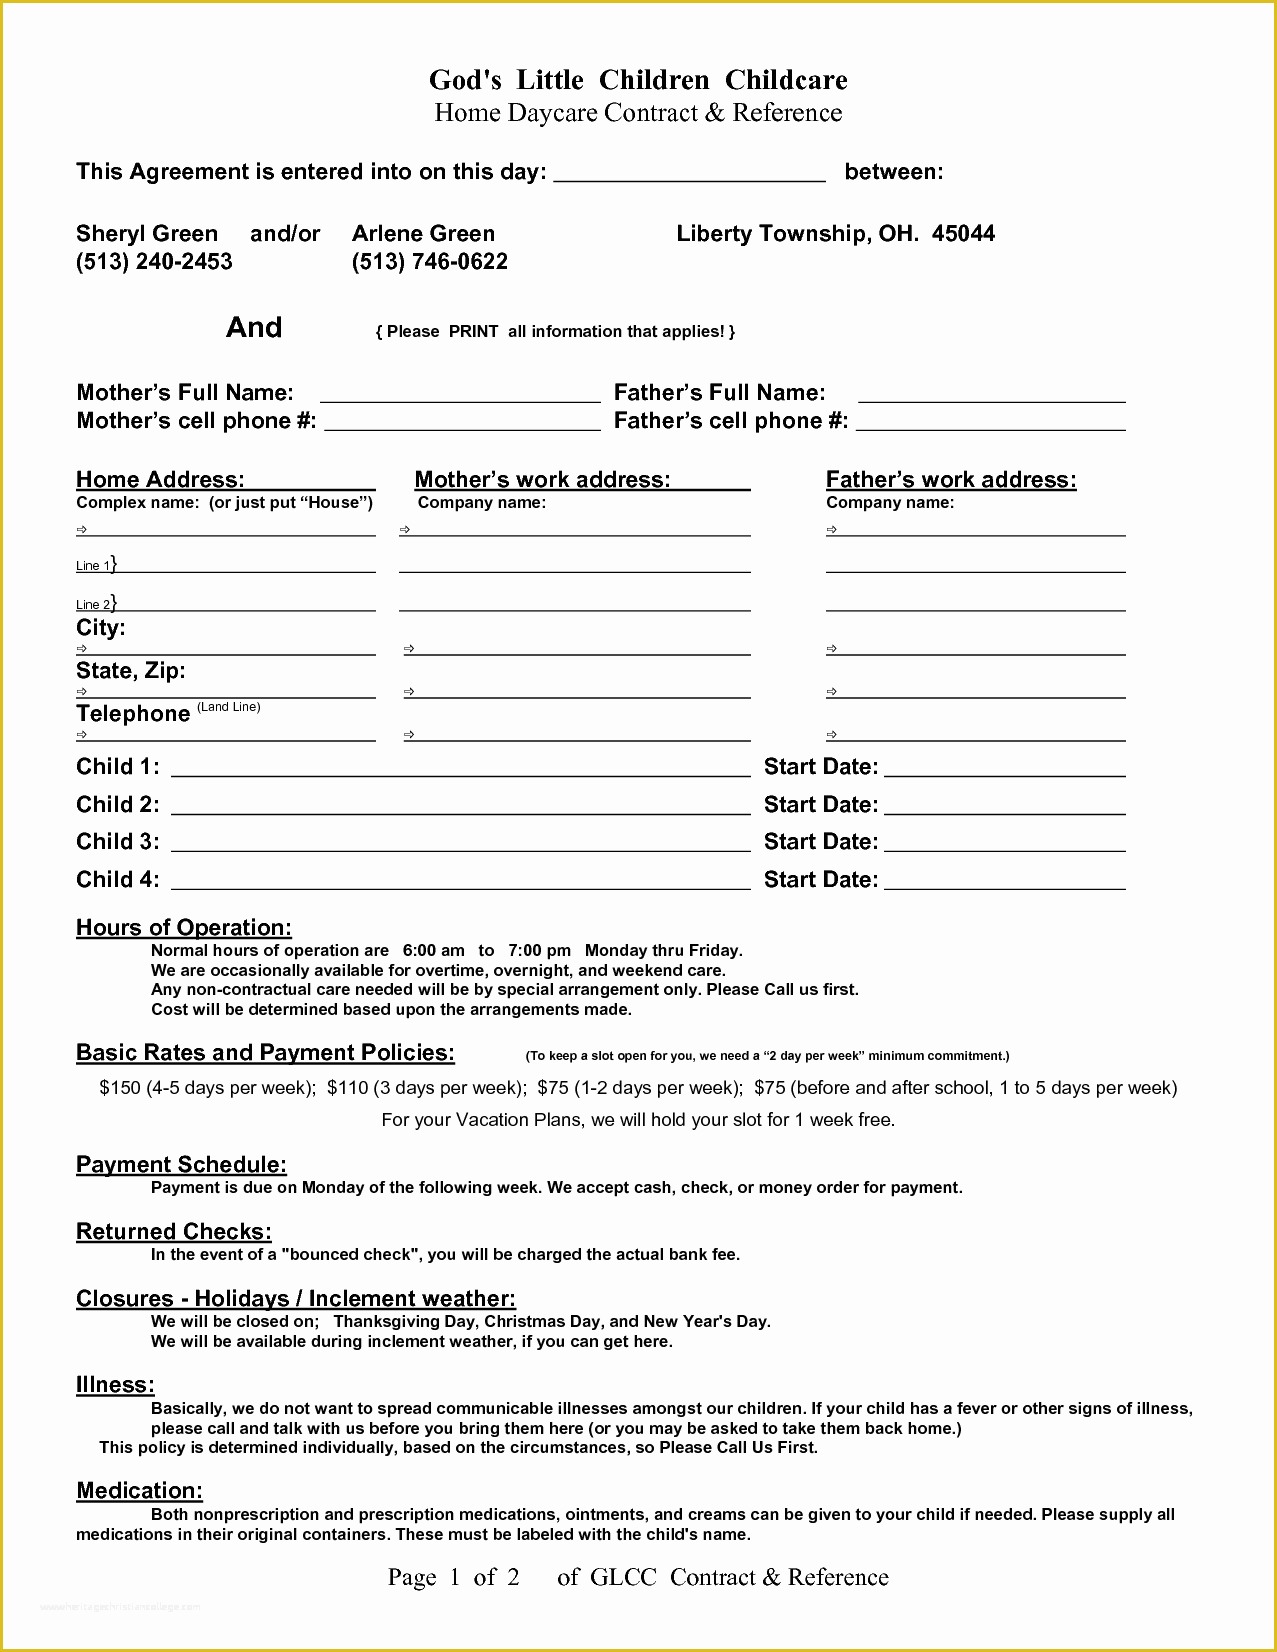 Daycare Contract Templates Free Of Pin by Takiyah James On Childcare Ideas